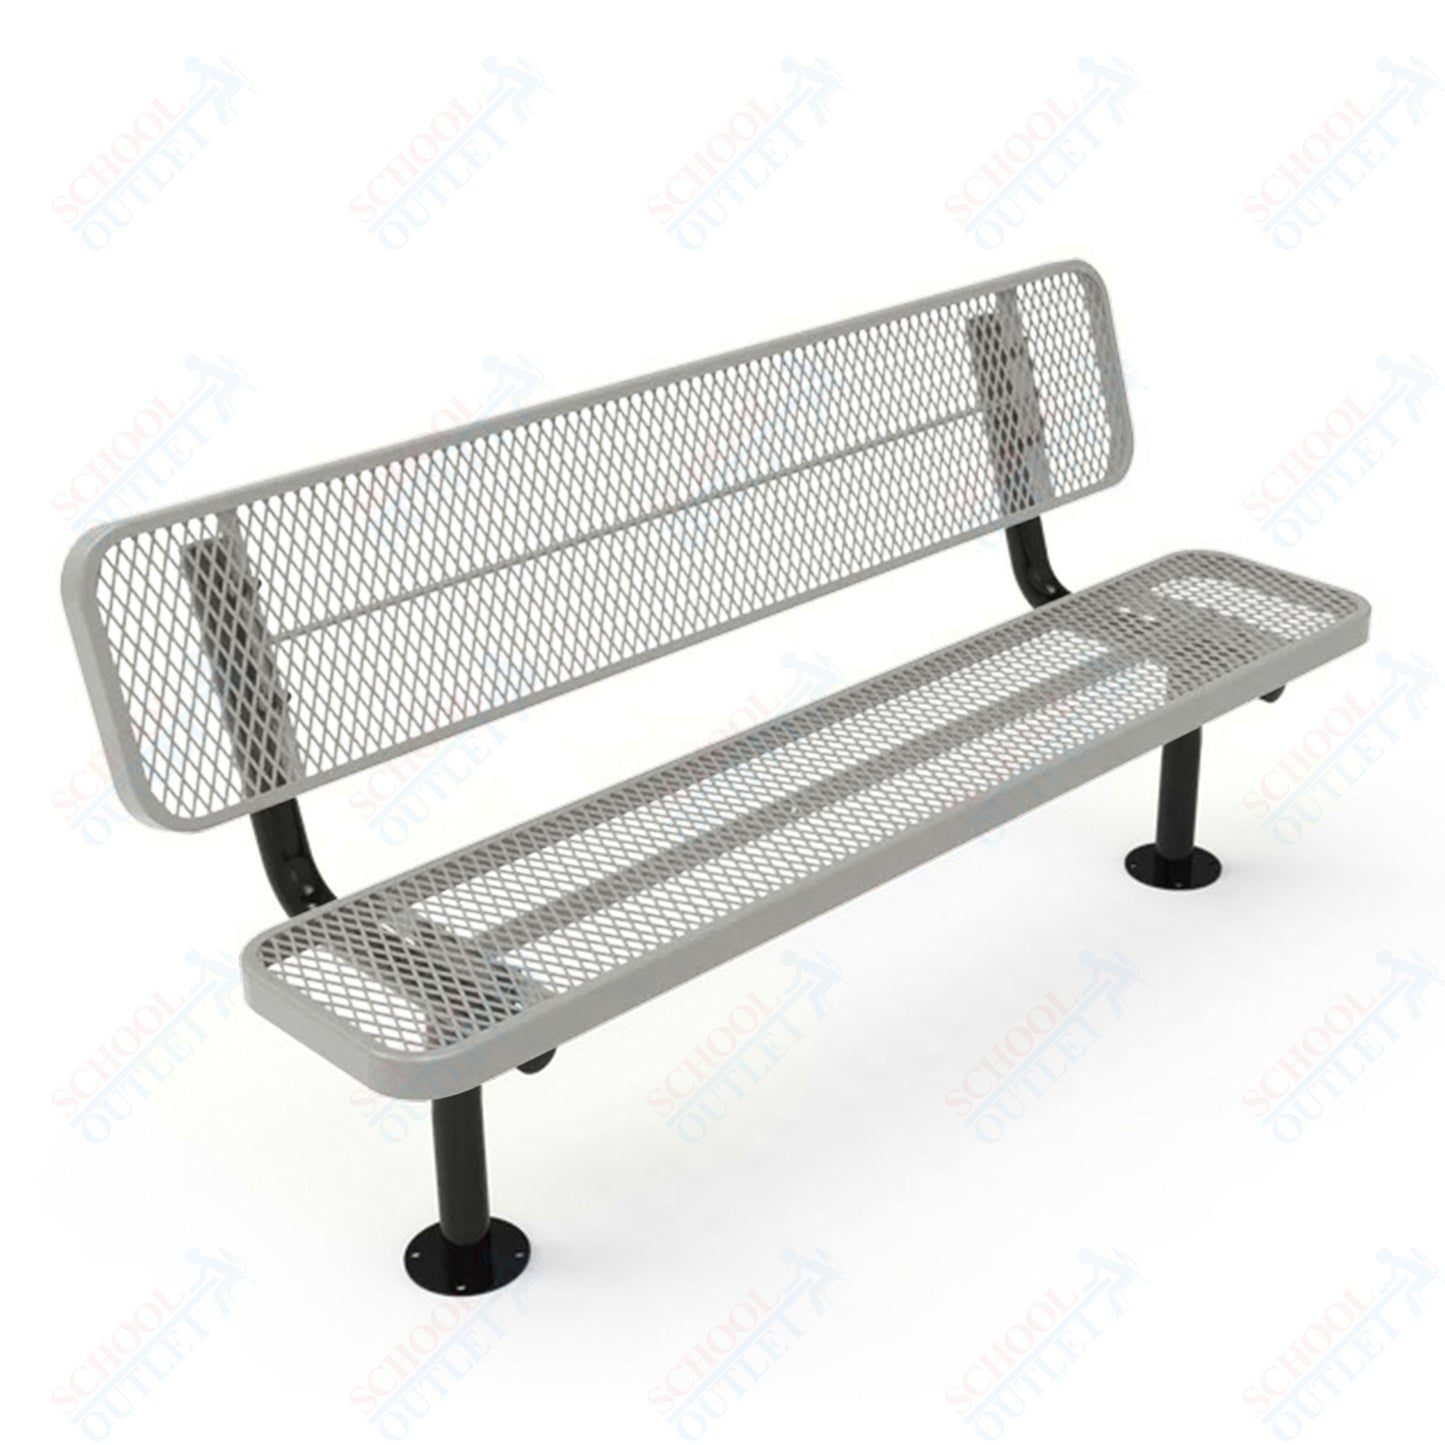 MyTcoat - Player's Outdoor Bench with Back - Surface Mount 4' L (MYT-BPY04-32)